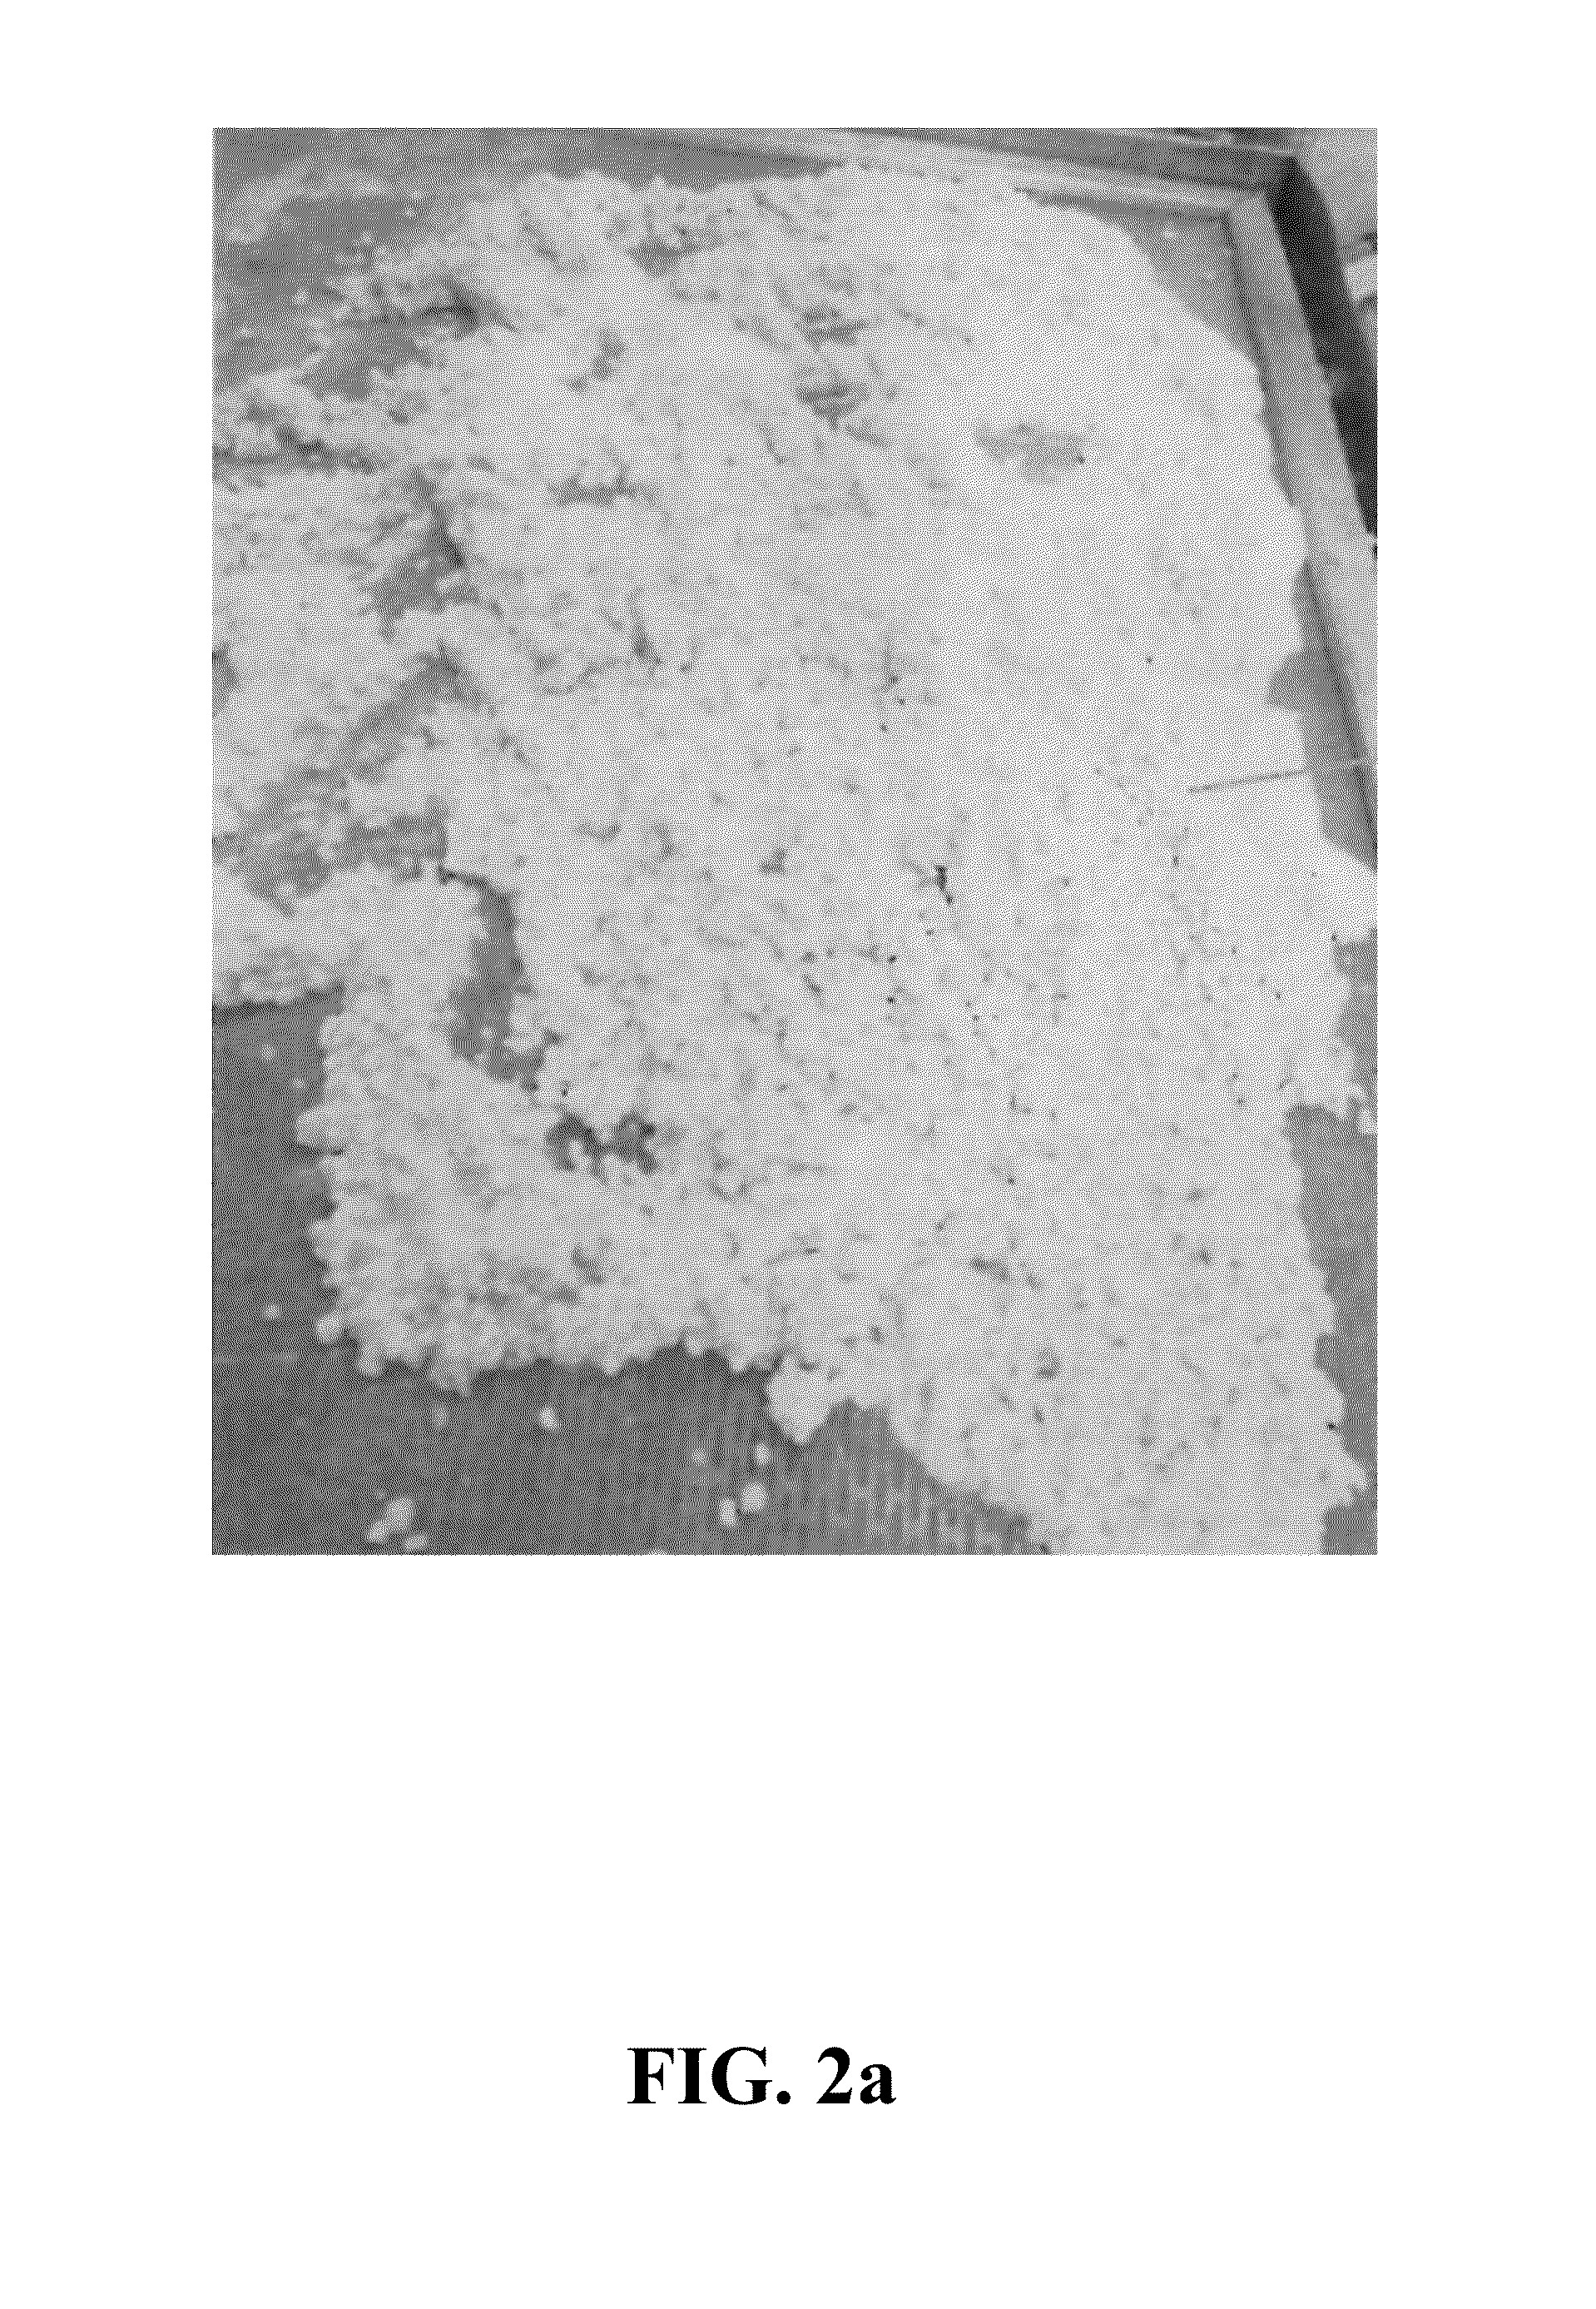 Process for coagulating sulfonated block copolymers